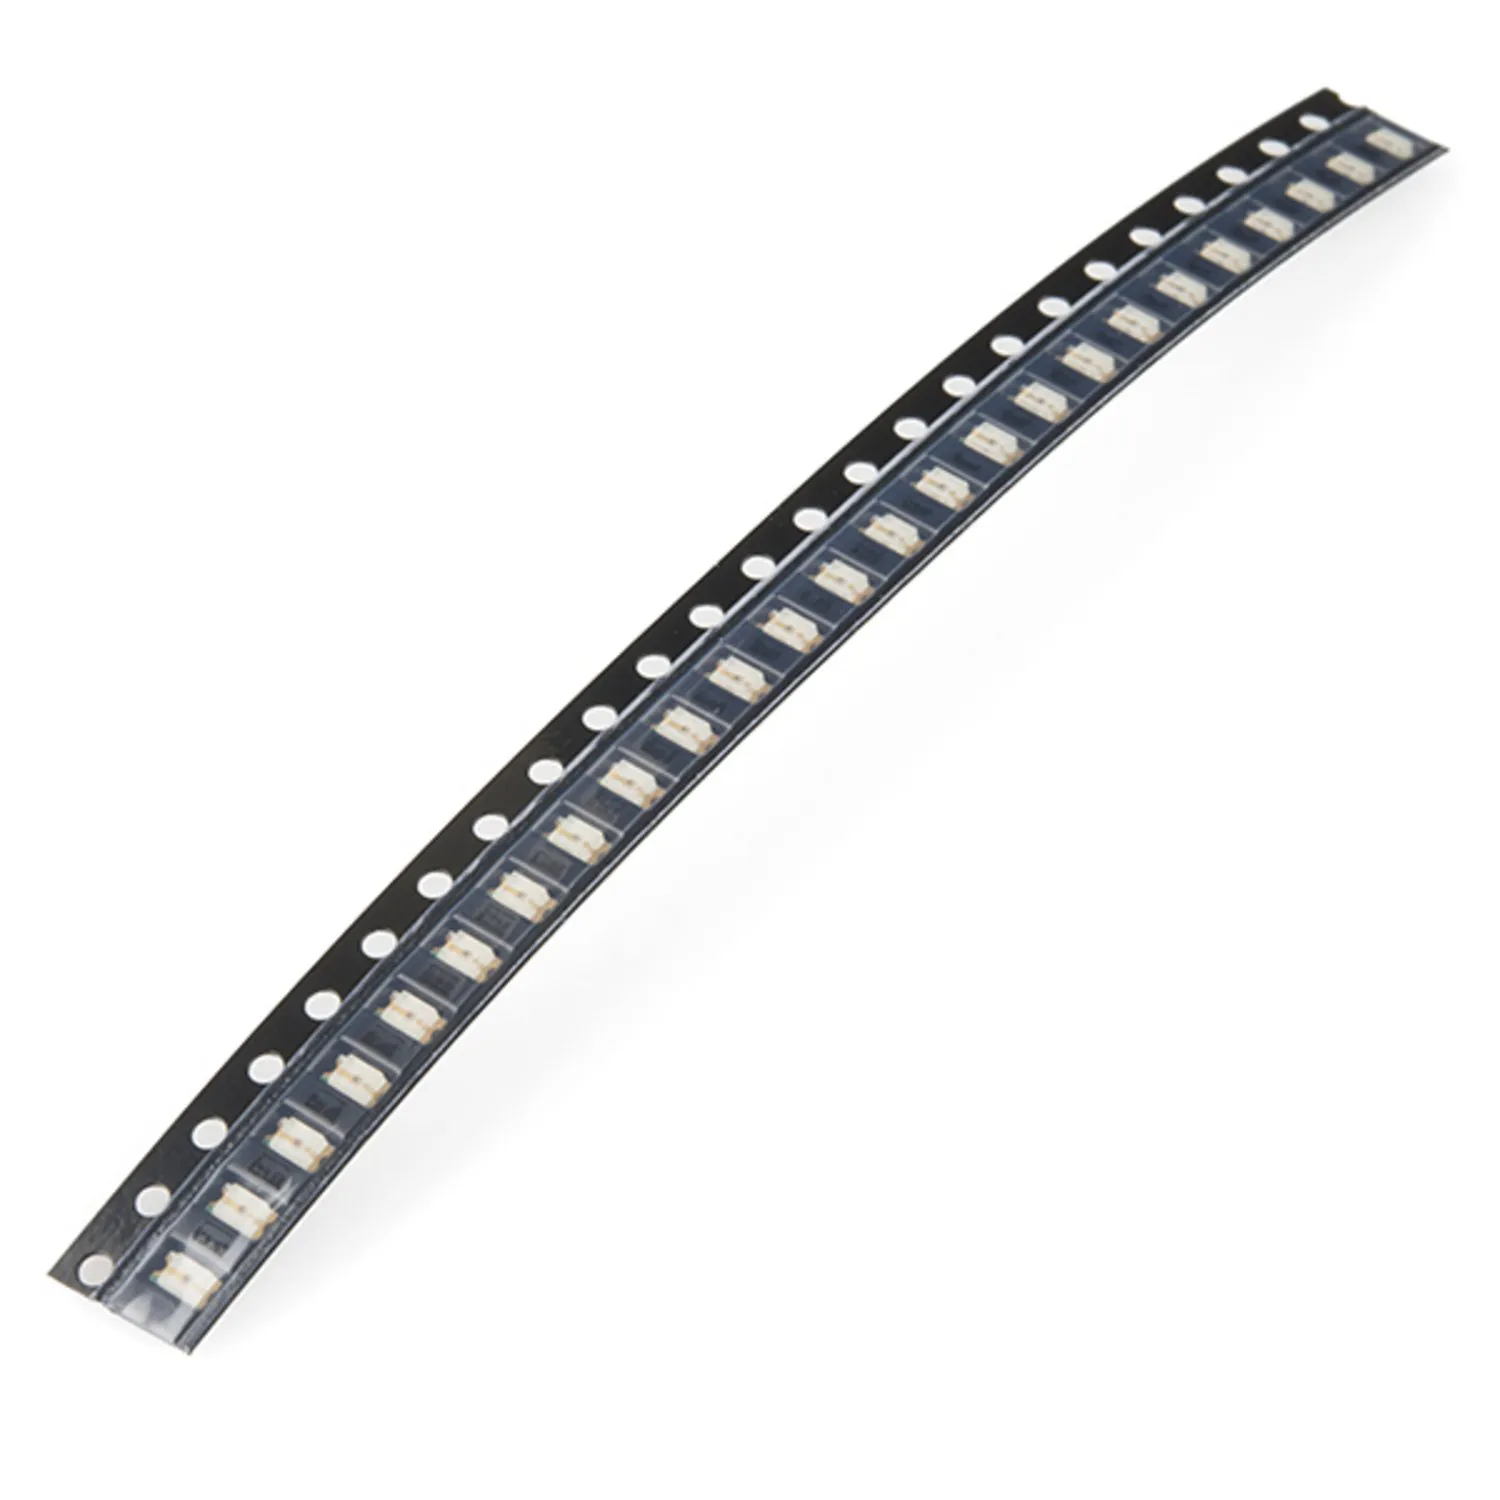 Photo of SMD LED - Blue 1206 (strip of 25)